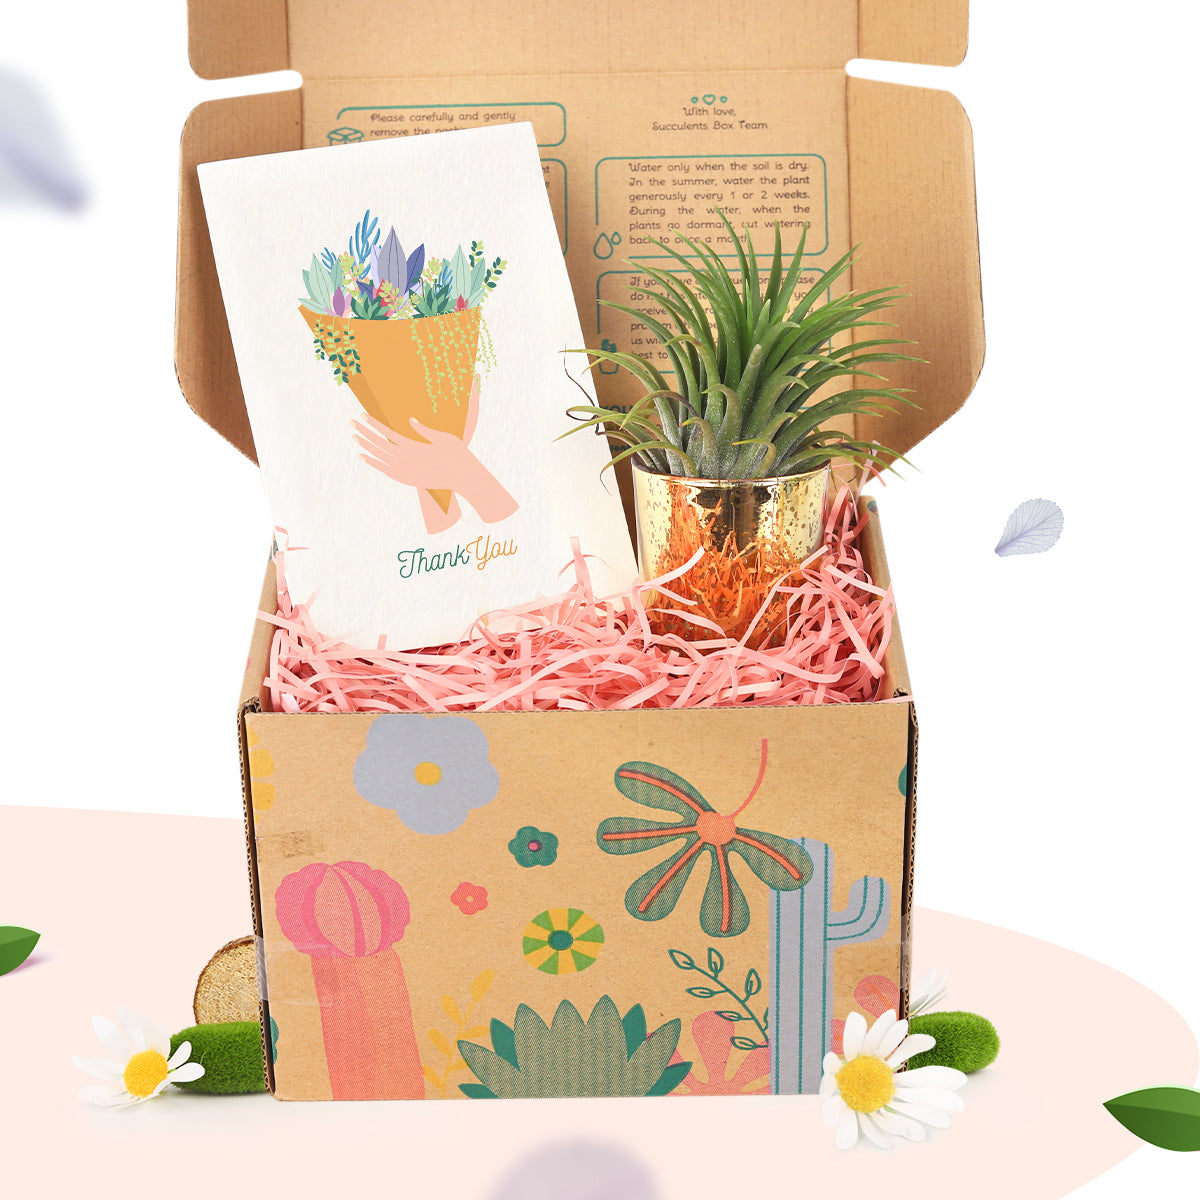 Buy Air Plant Gift Box online, Shop Best Selling Air Plant & Tillandsia Gifts, live plant corporate gift, Sustainable Corporate Gifts